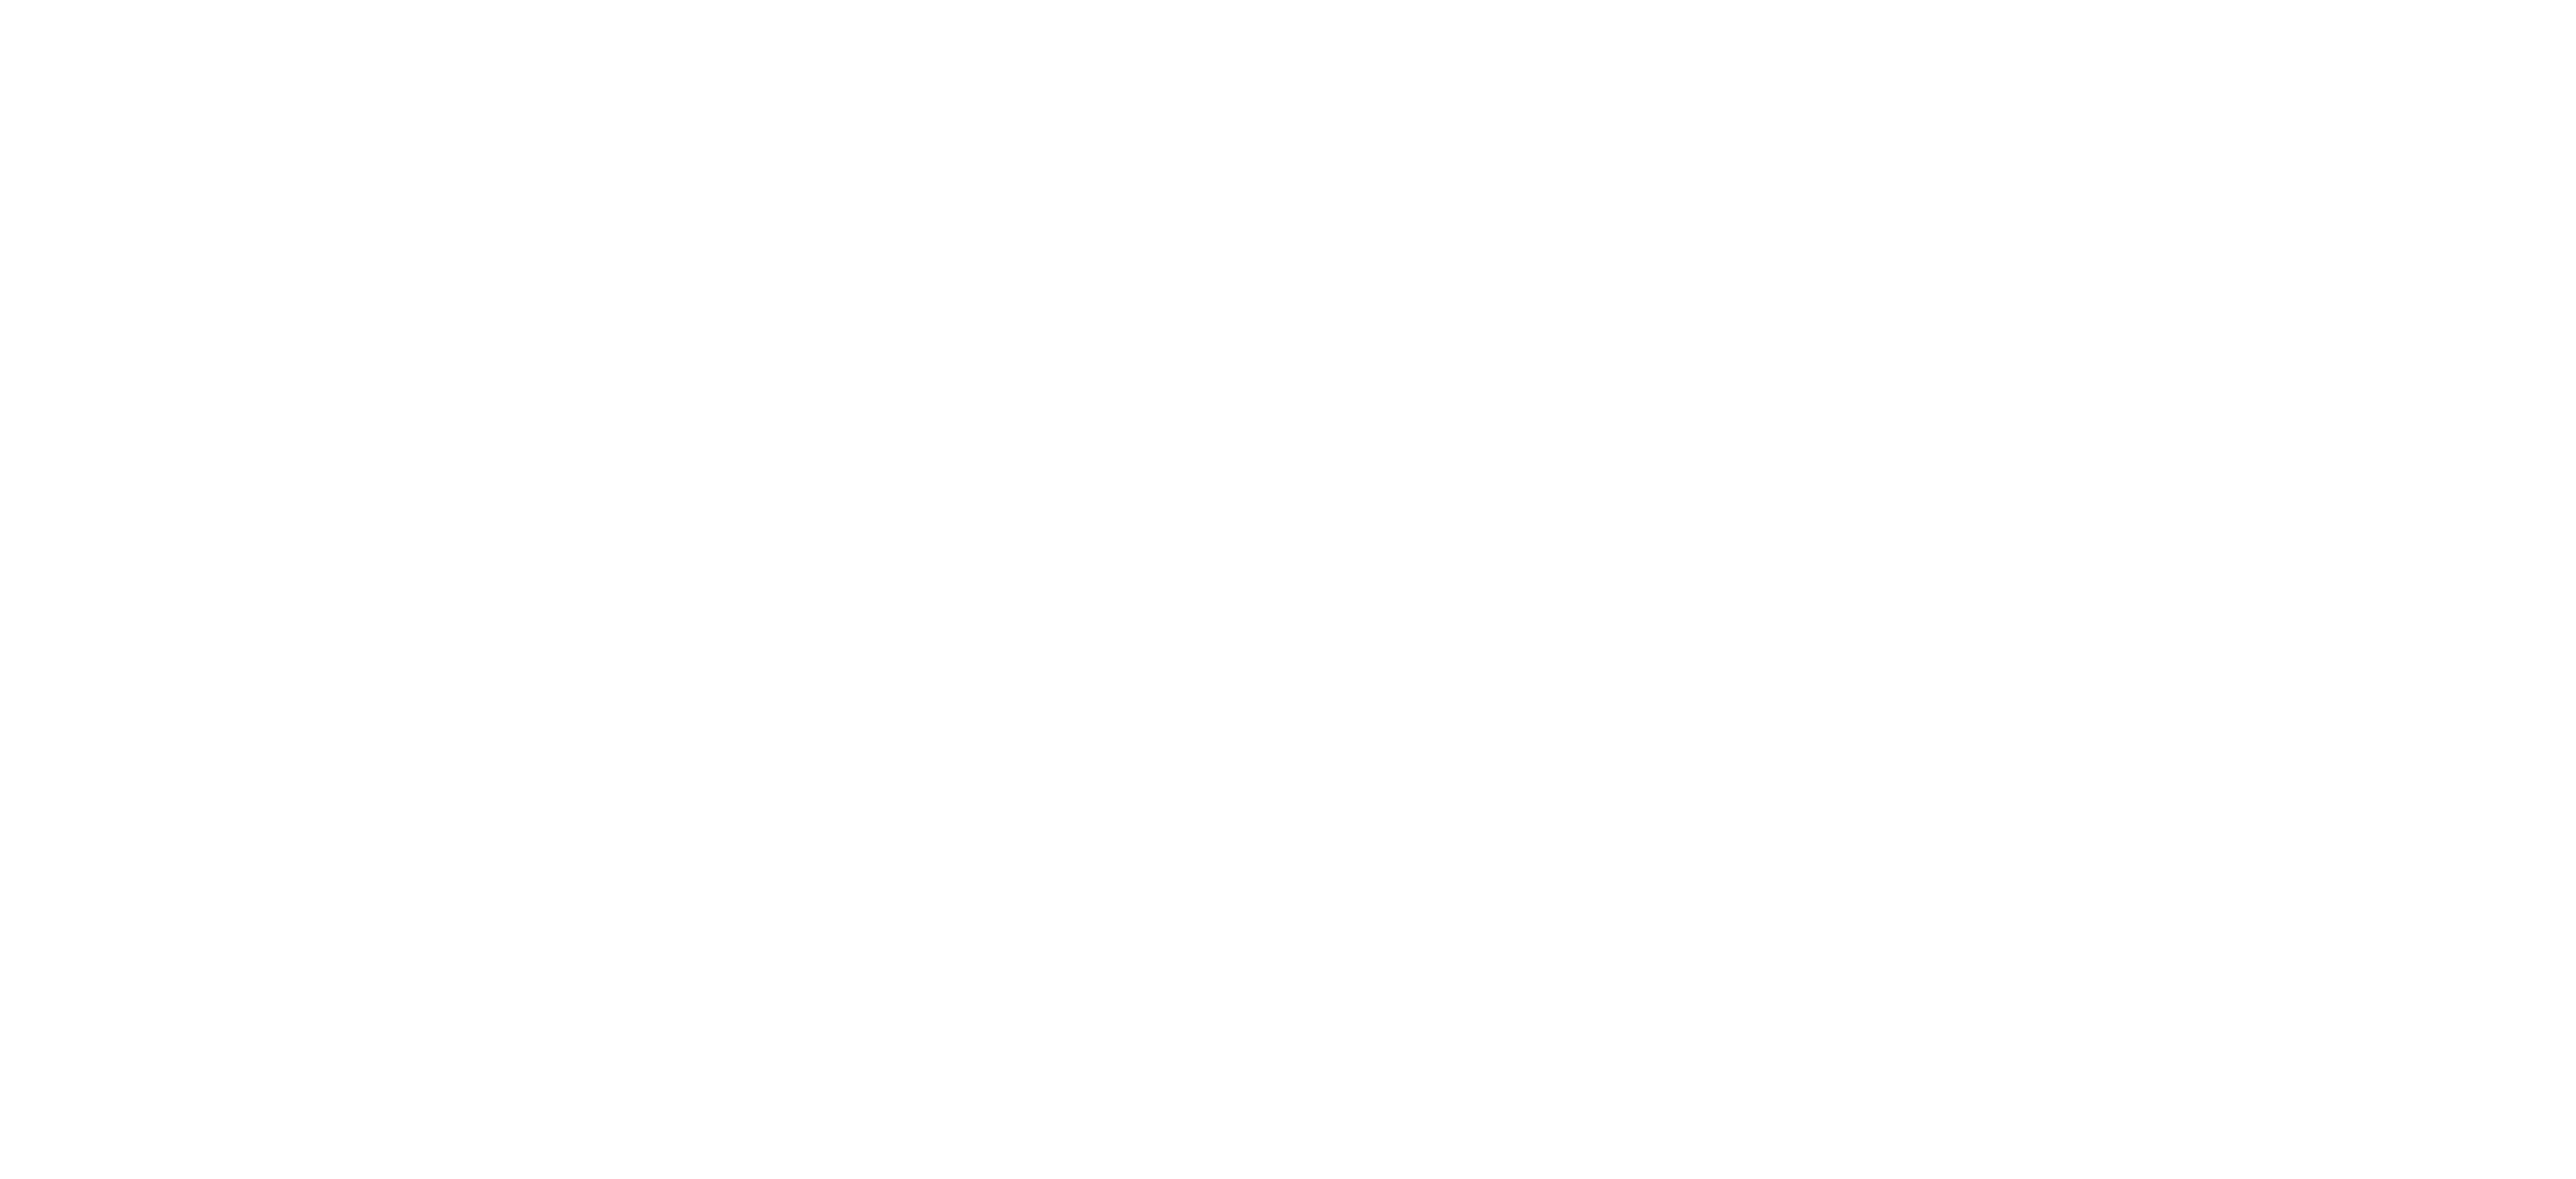 L'Odyssee Spectacle